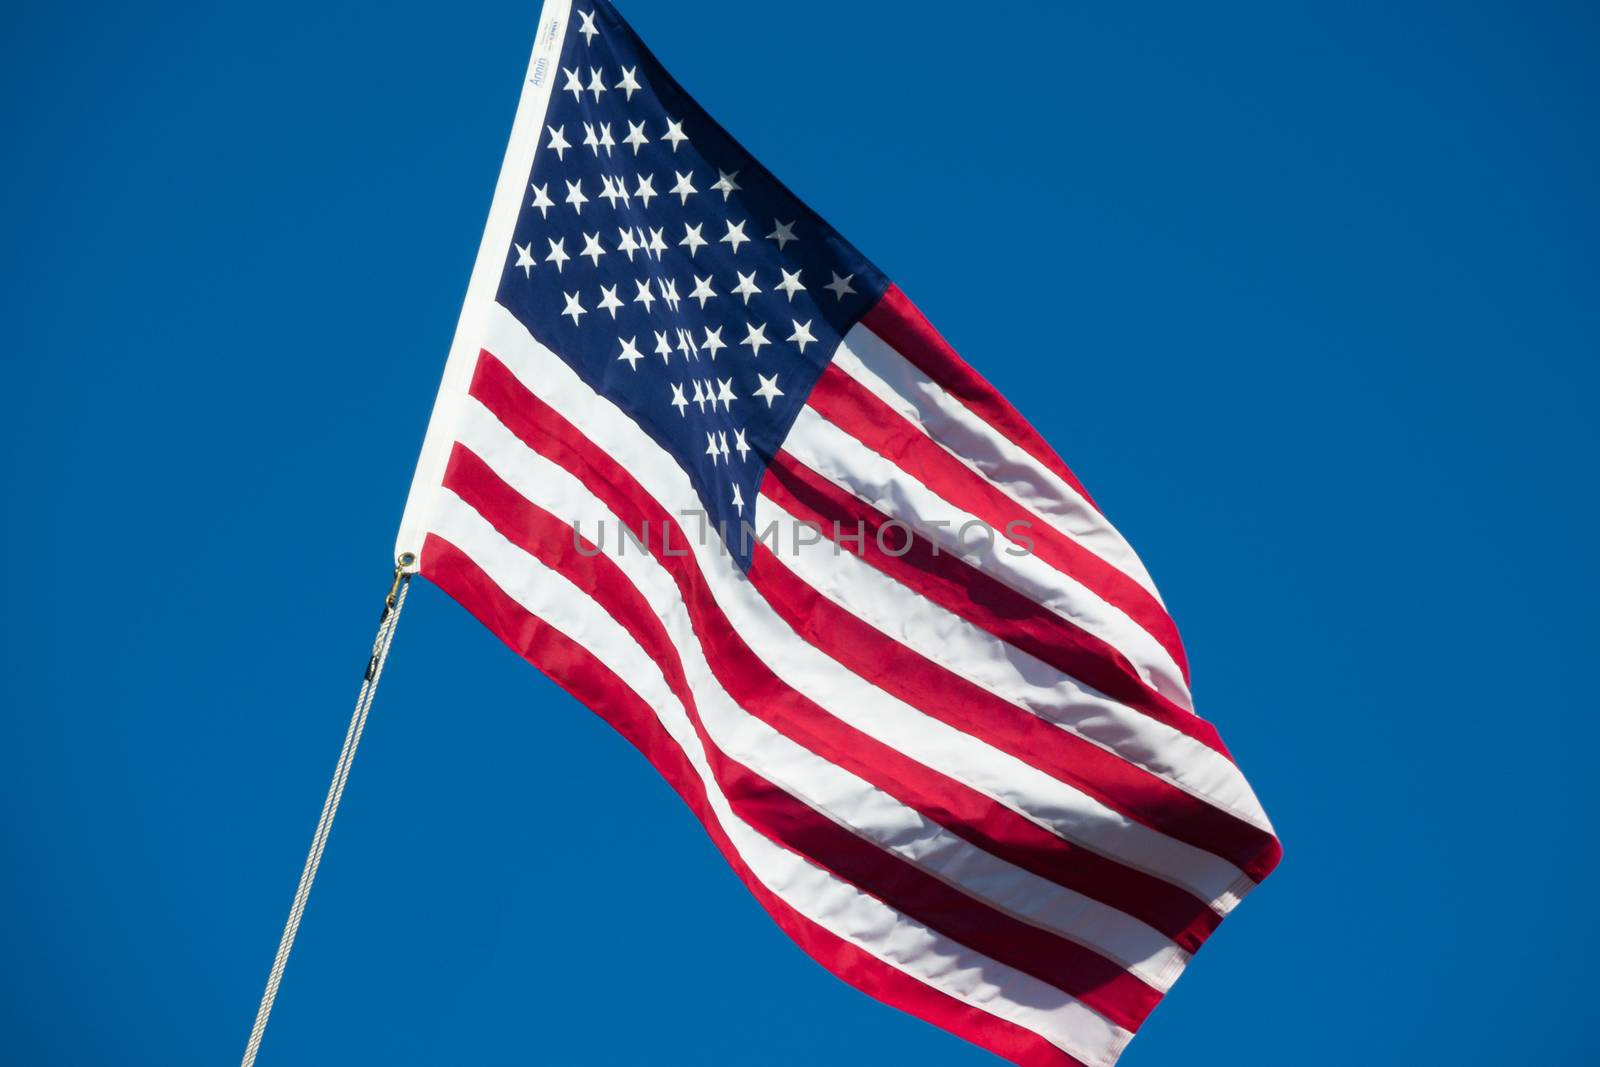 United States of America flag star spangled banner stars and str by MXW_Stock